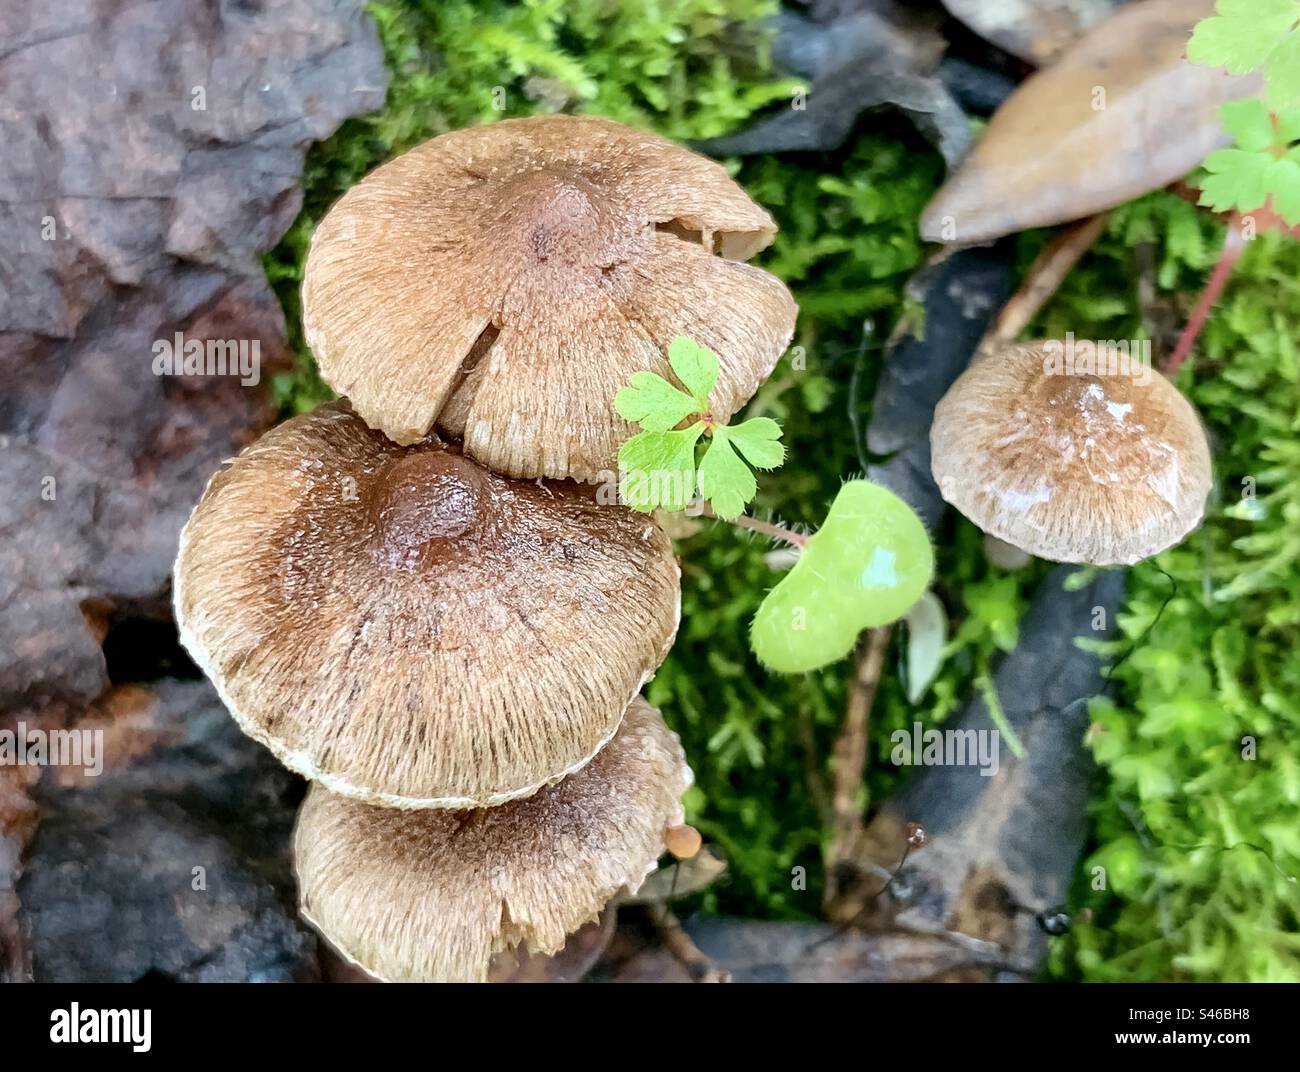 Inocybaceae fungi with small green plants & mosses Stock Photo